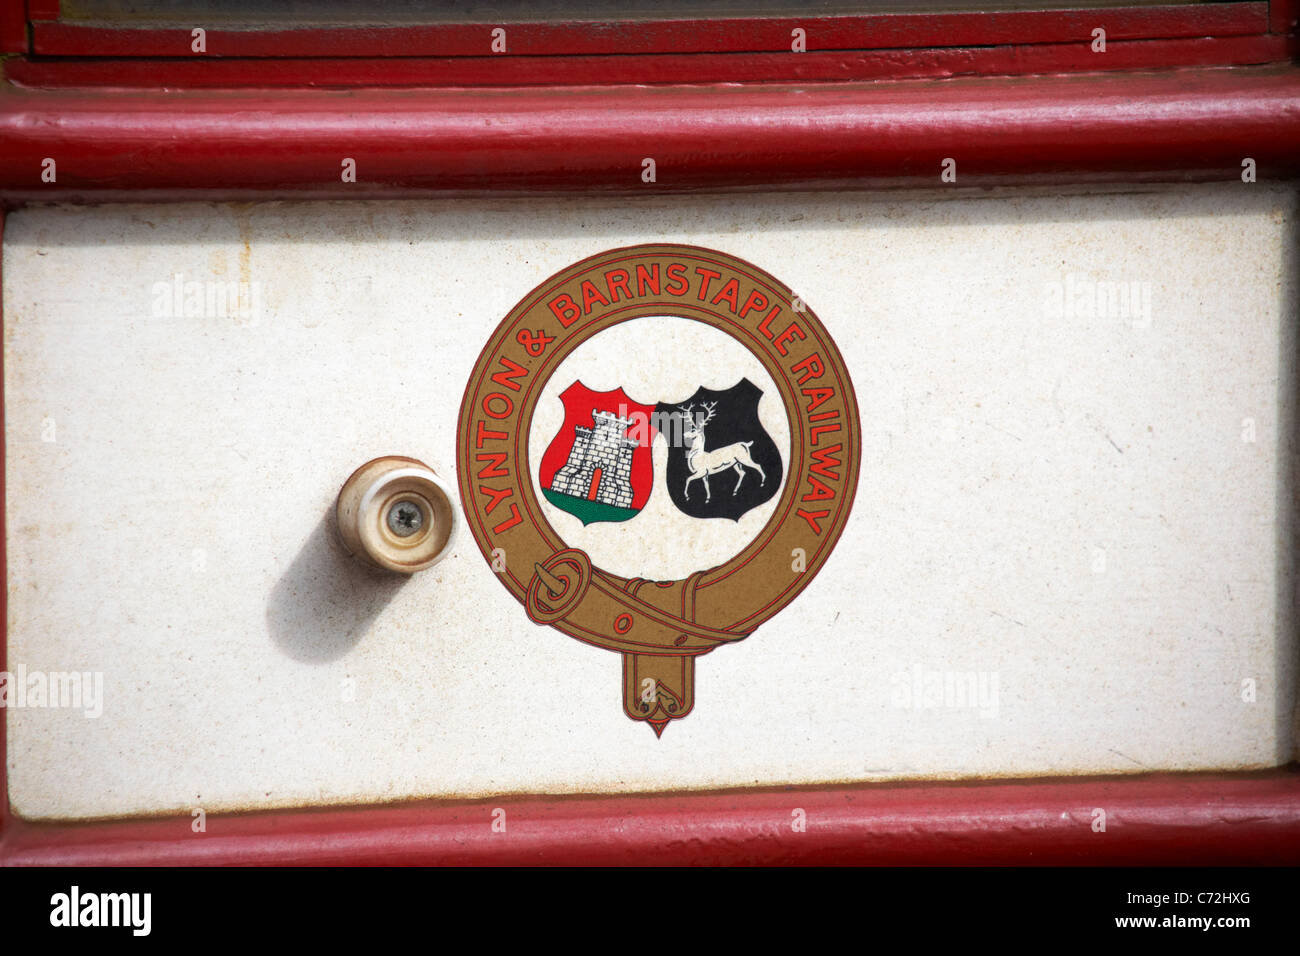 Lynton & Barnstaple Railway logo on side of engine at Woody Bay Station in August Stock Photo